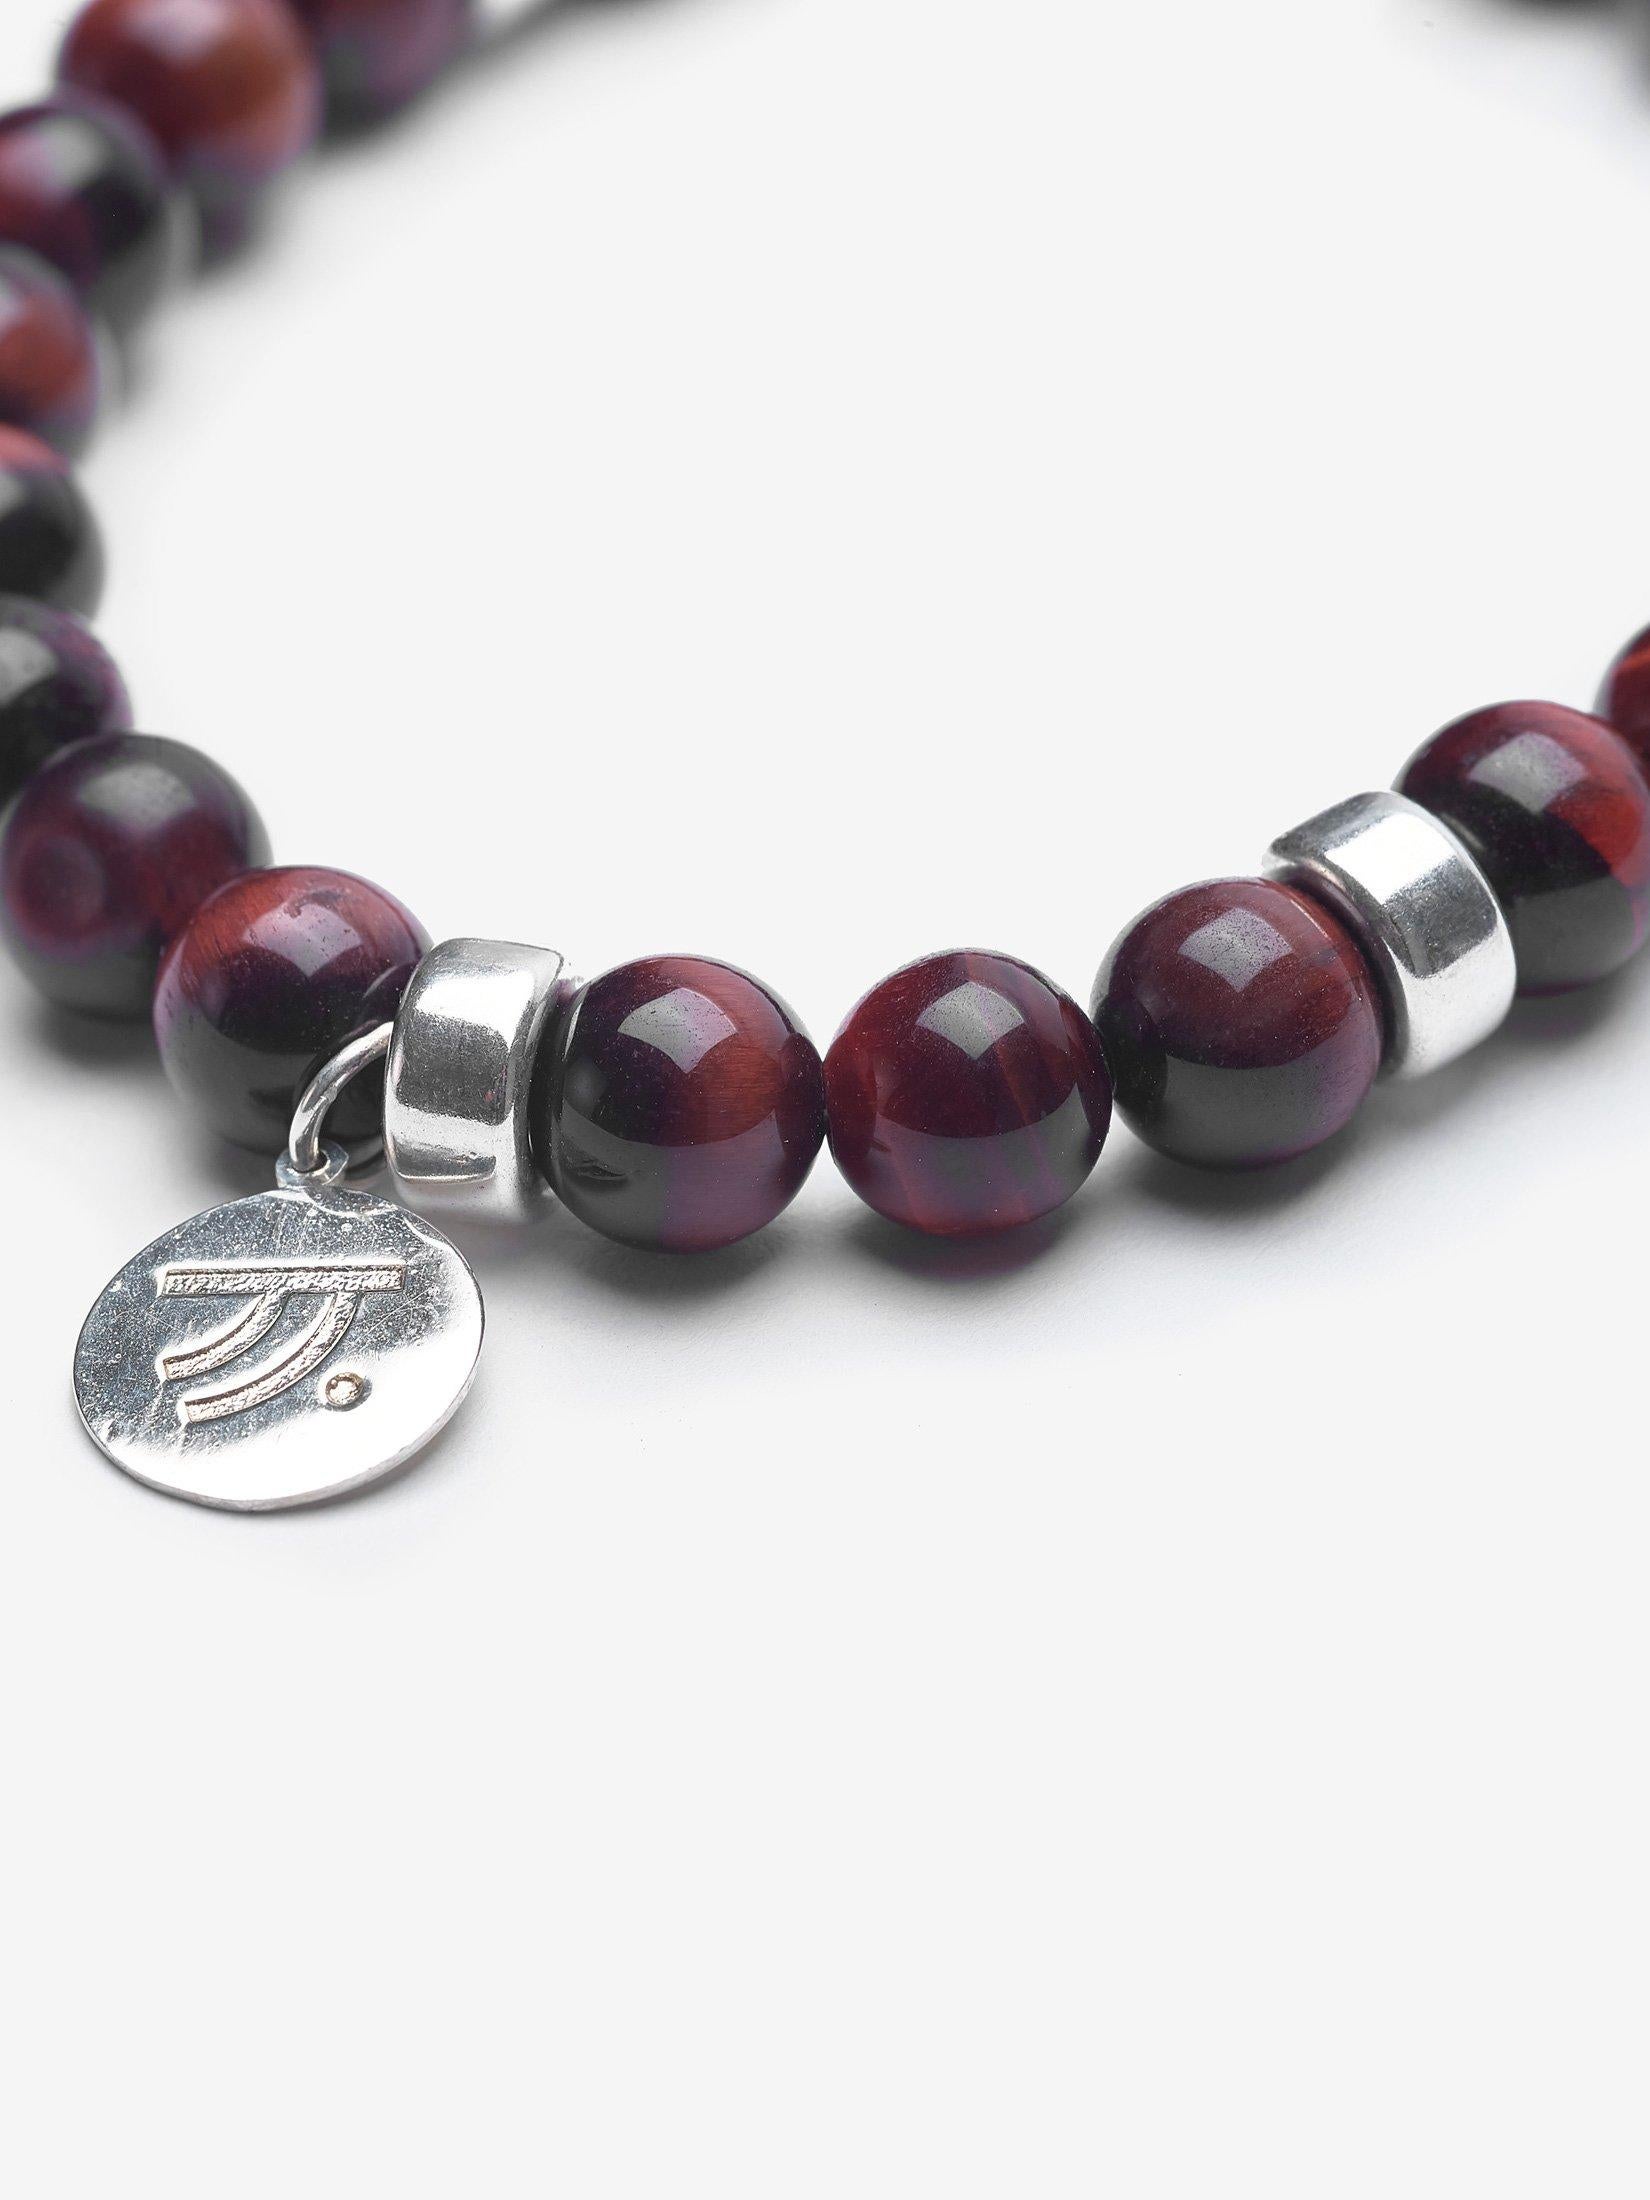 Story Behind the Jewelry
The mahogany Tiger's Eye stones are accented with sterling silver.  The song was inspired by 'Closer' by Nine Inch Nails blended techno, industrial and alternative rock. The song has been highly misinterpreted as a lust